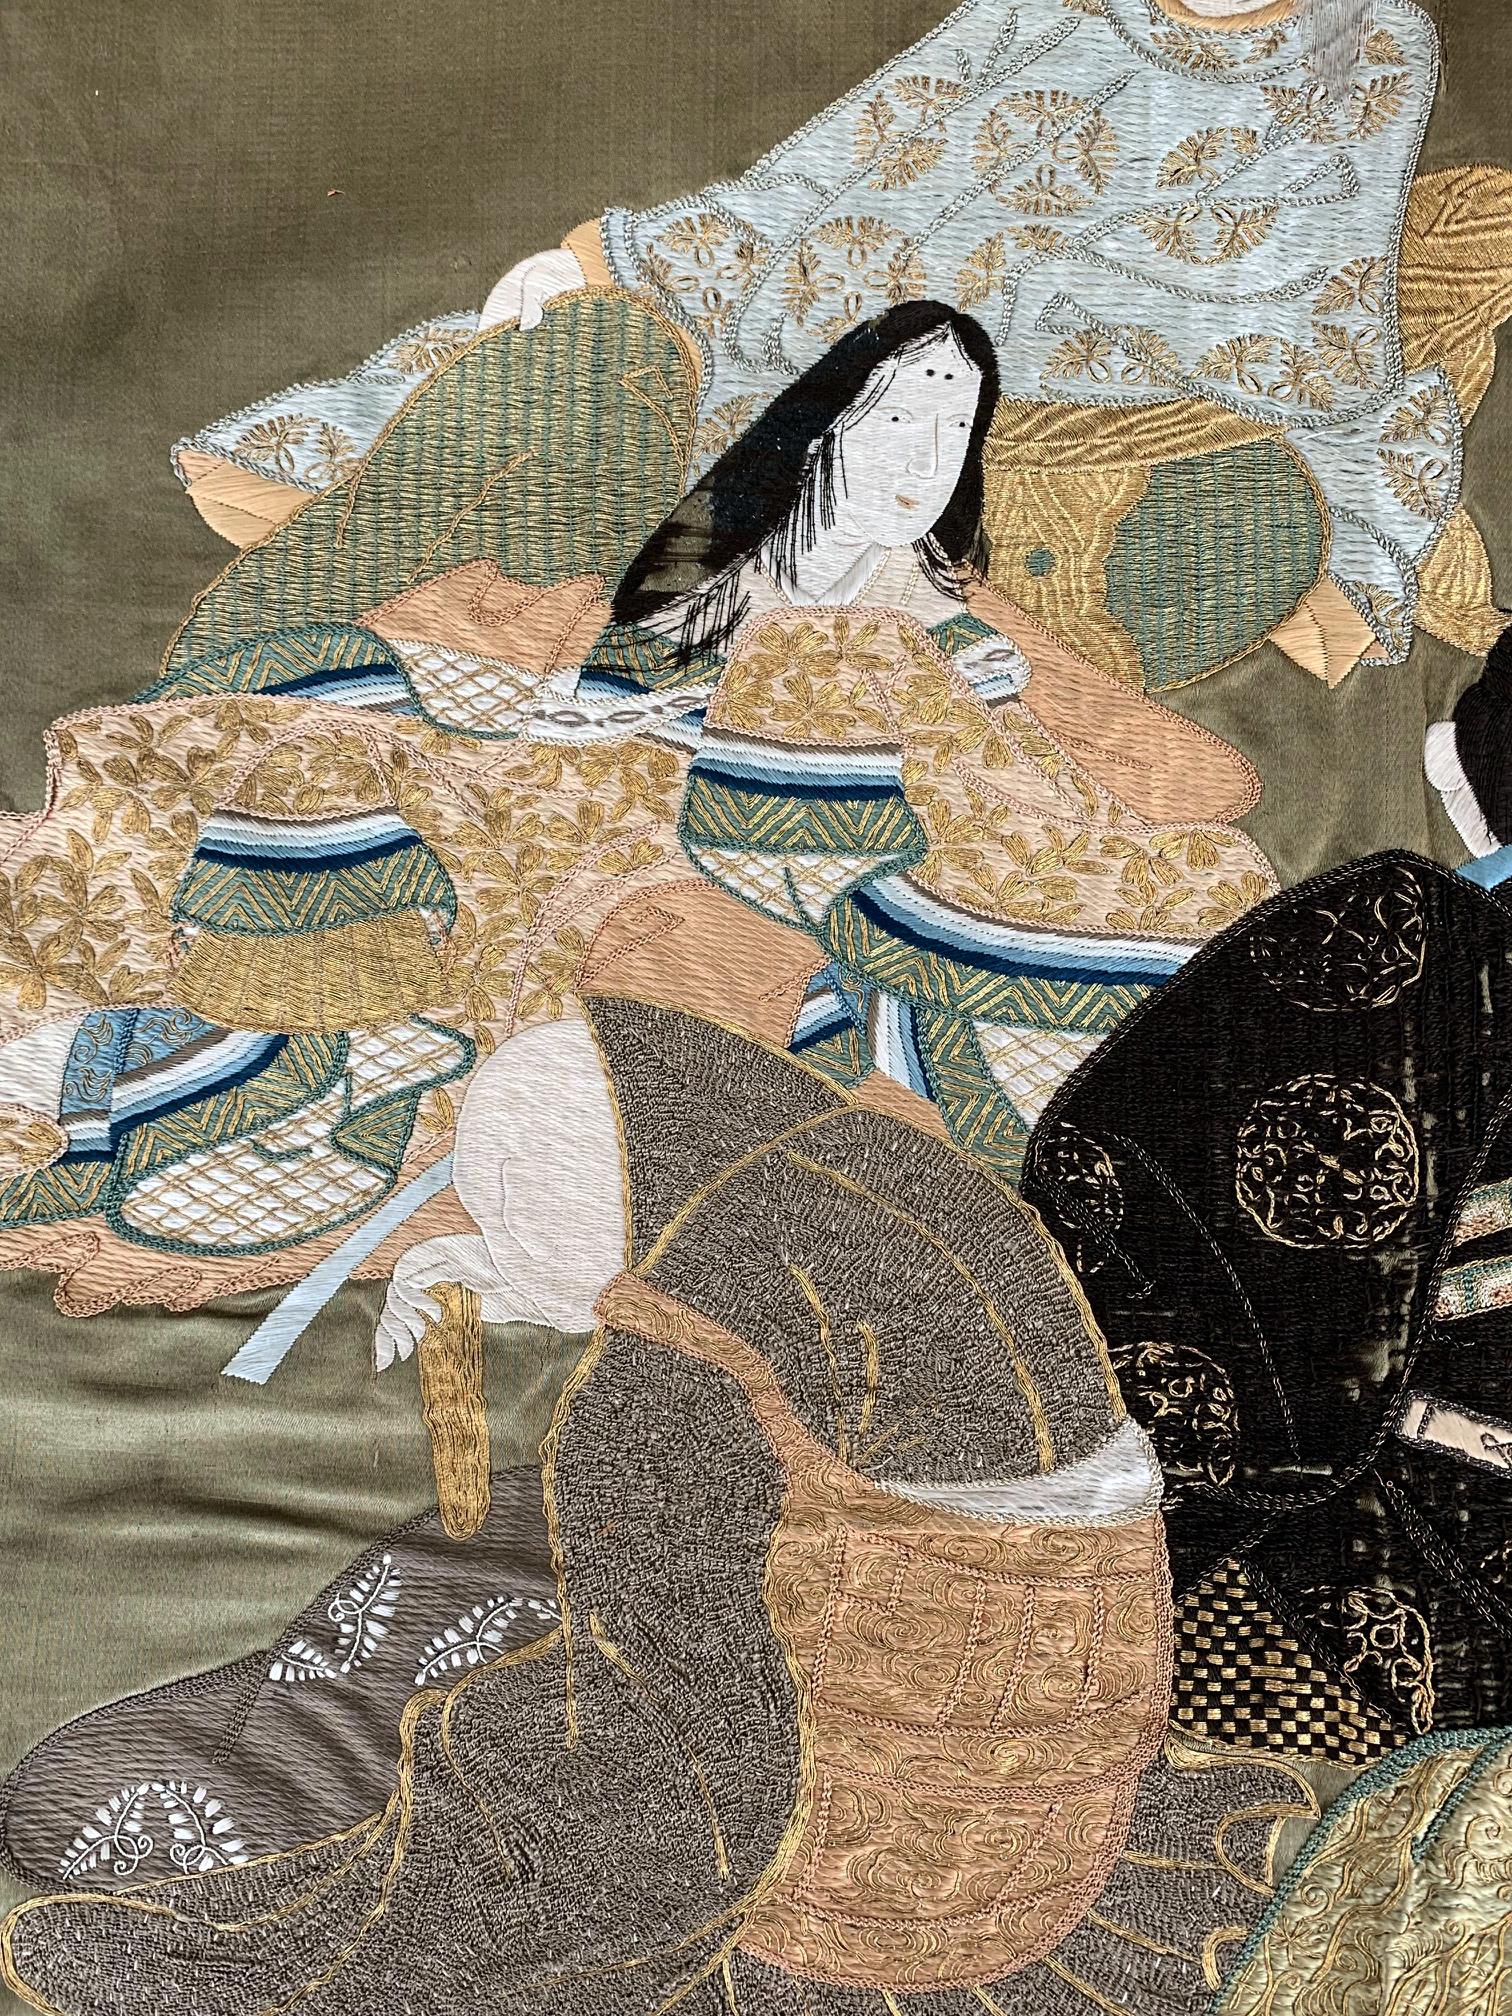 Embroidered Framed Japanese Embroidery Textile Art from Meiji Period